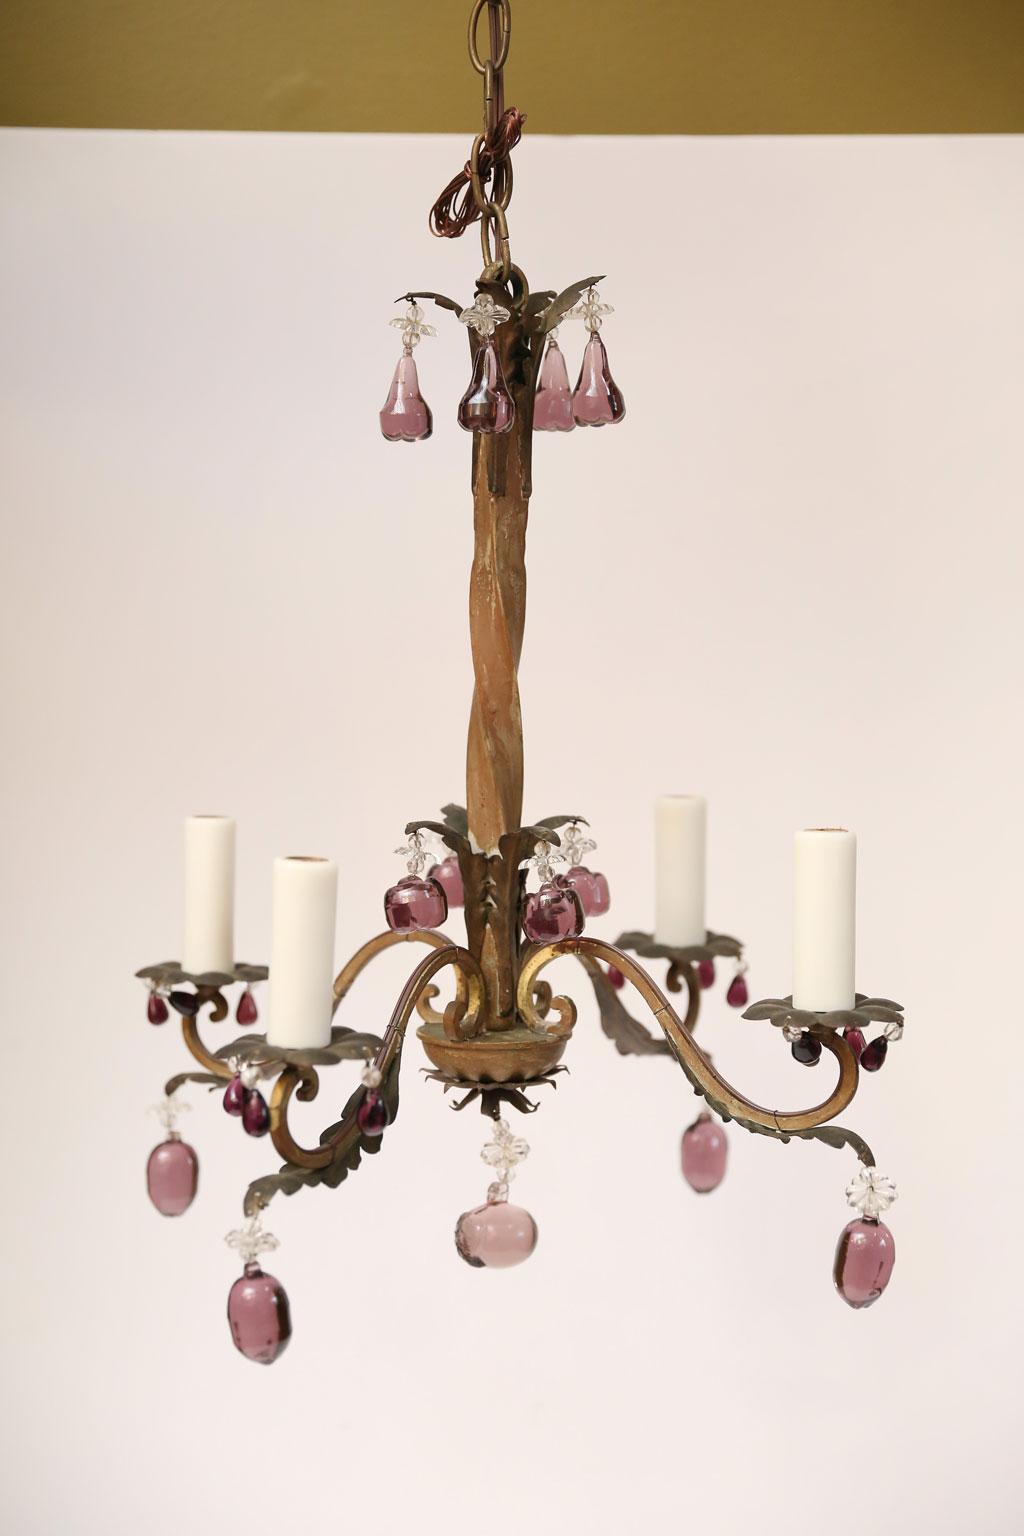 Mid-20th Century French Romantic Iron and Crystal Chandelier With Amethyst-Colored Drops